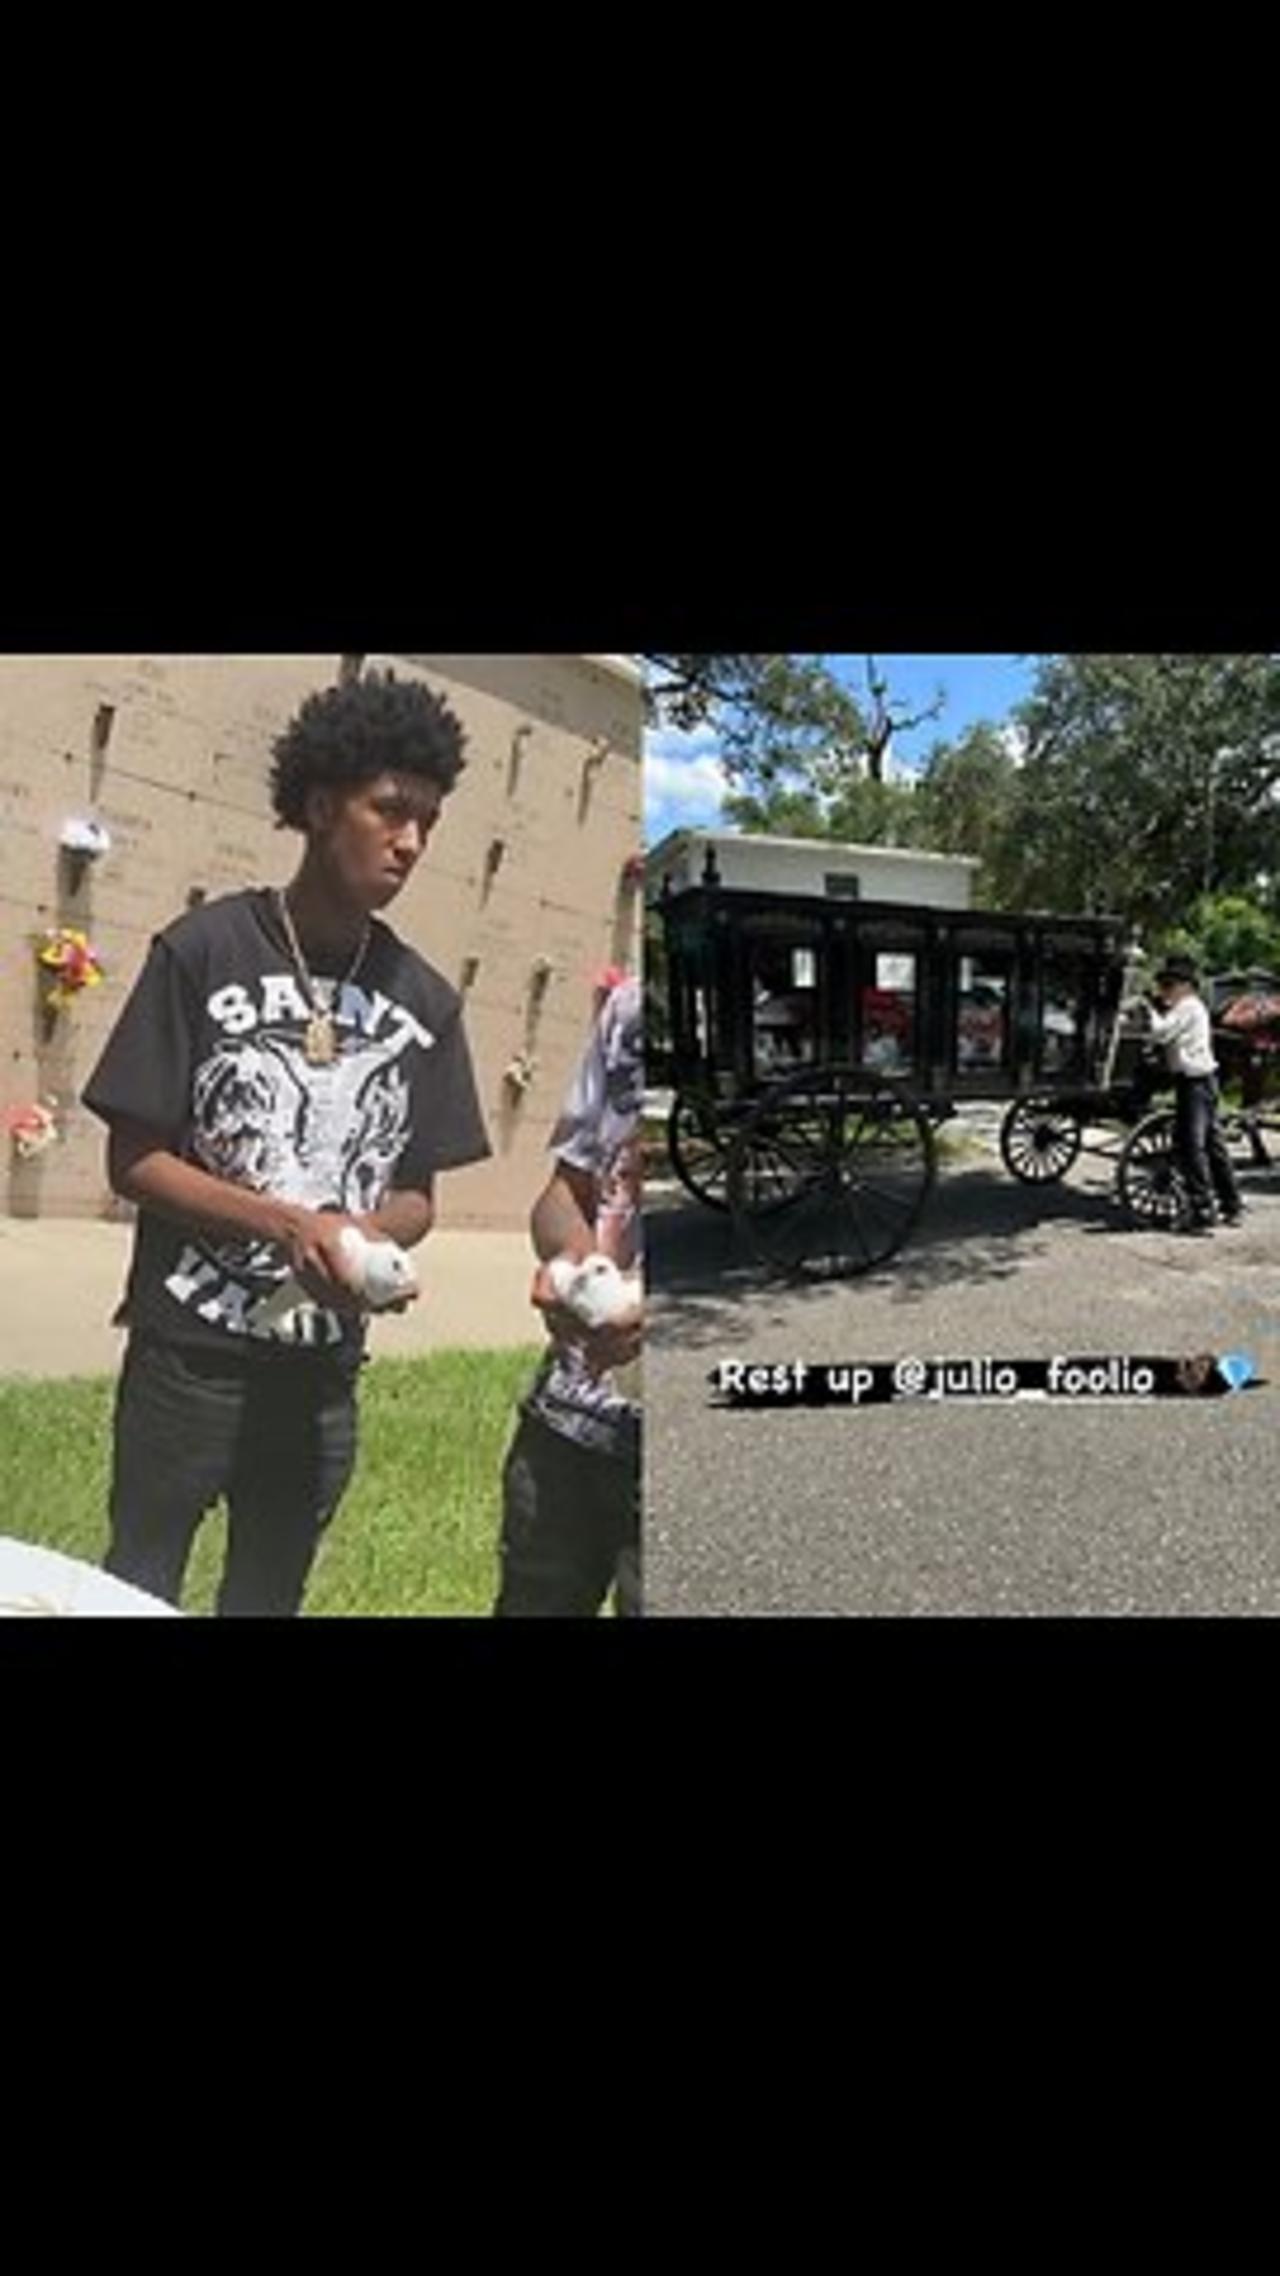 Joolio Foolio in Casket Funeral Footage and IG Account Still Posting After his Unaliving